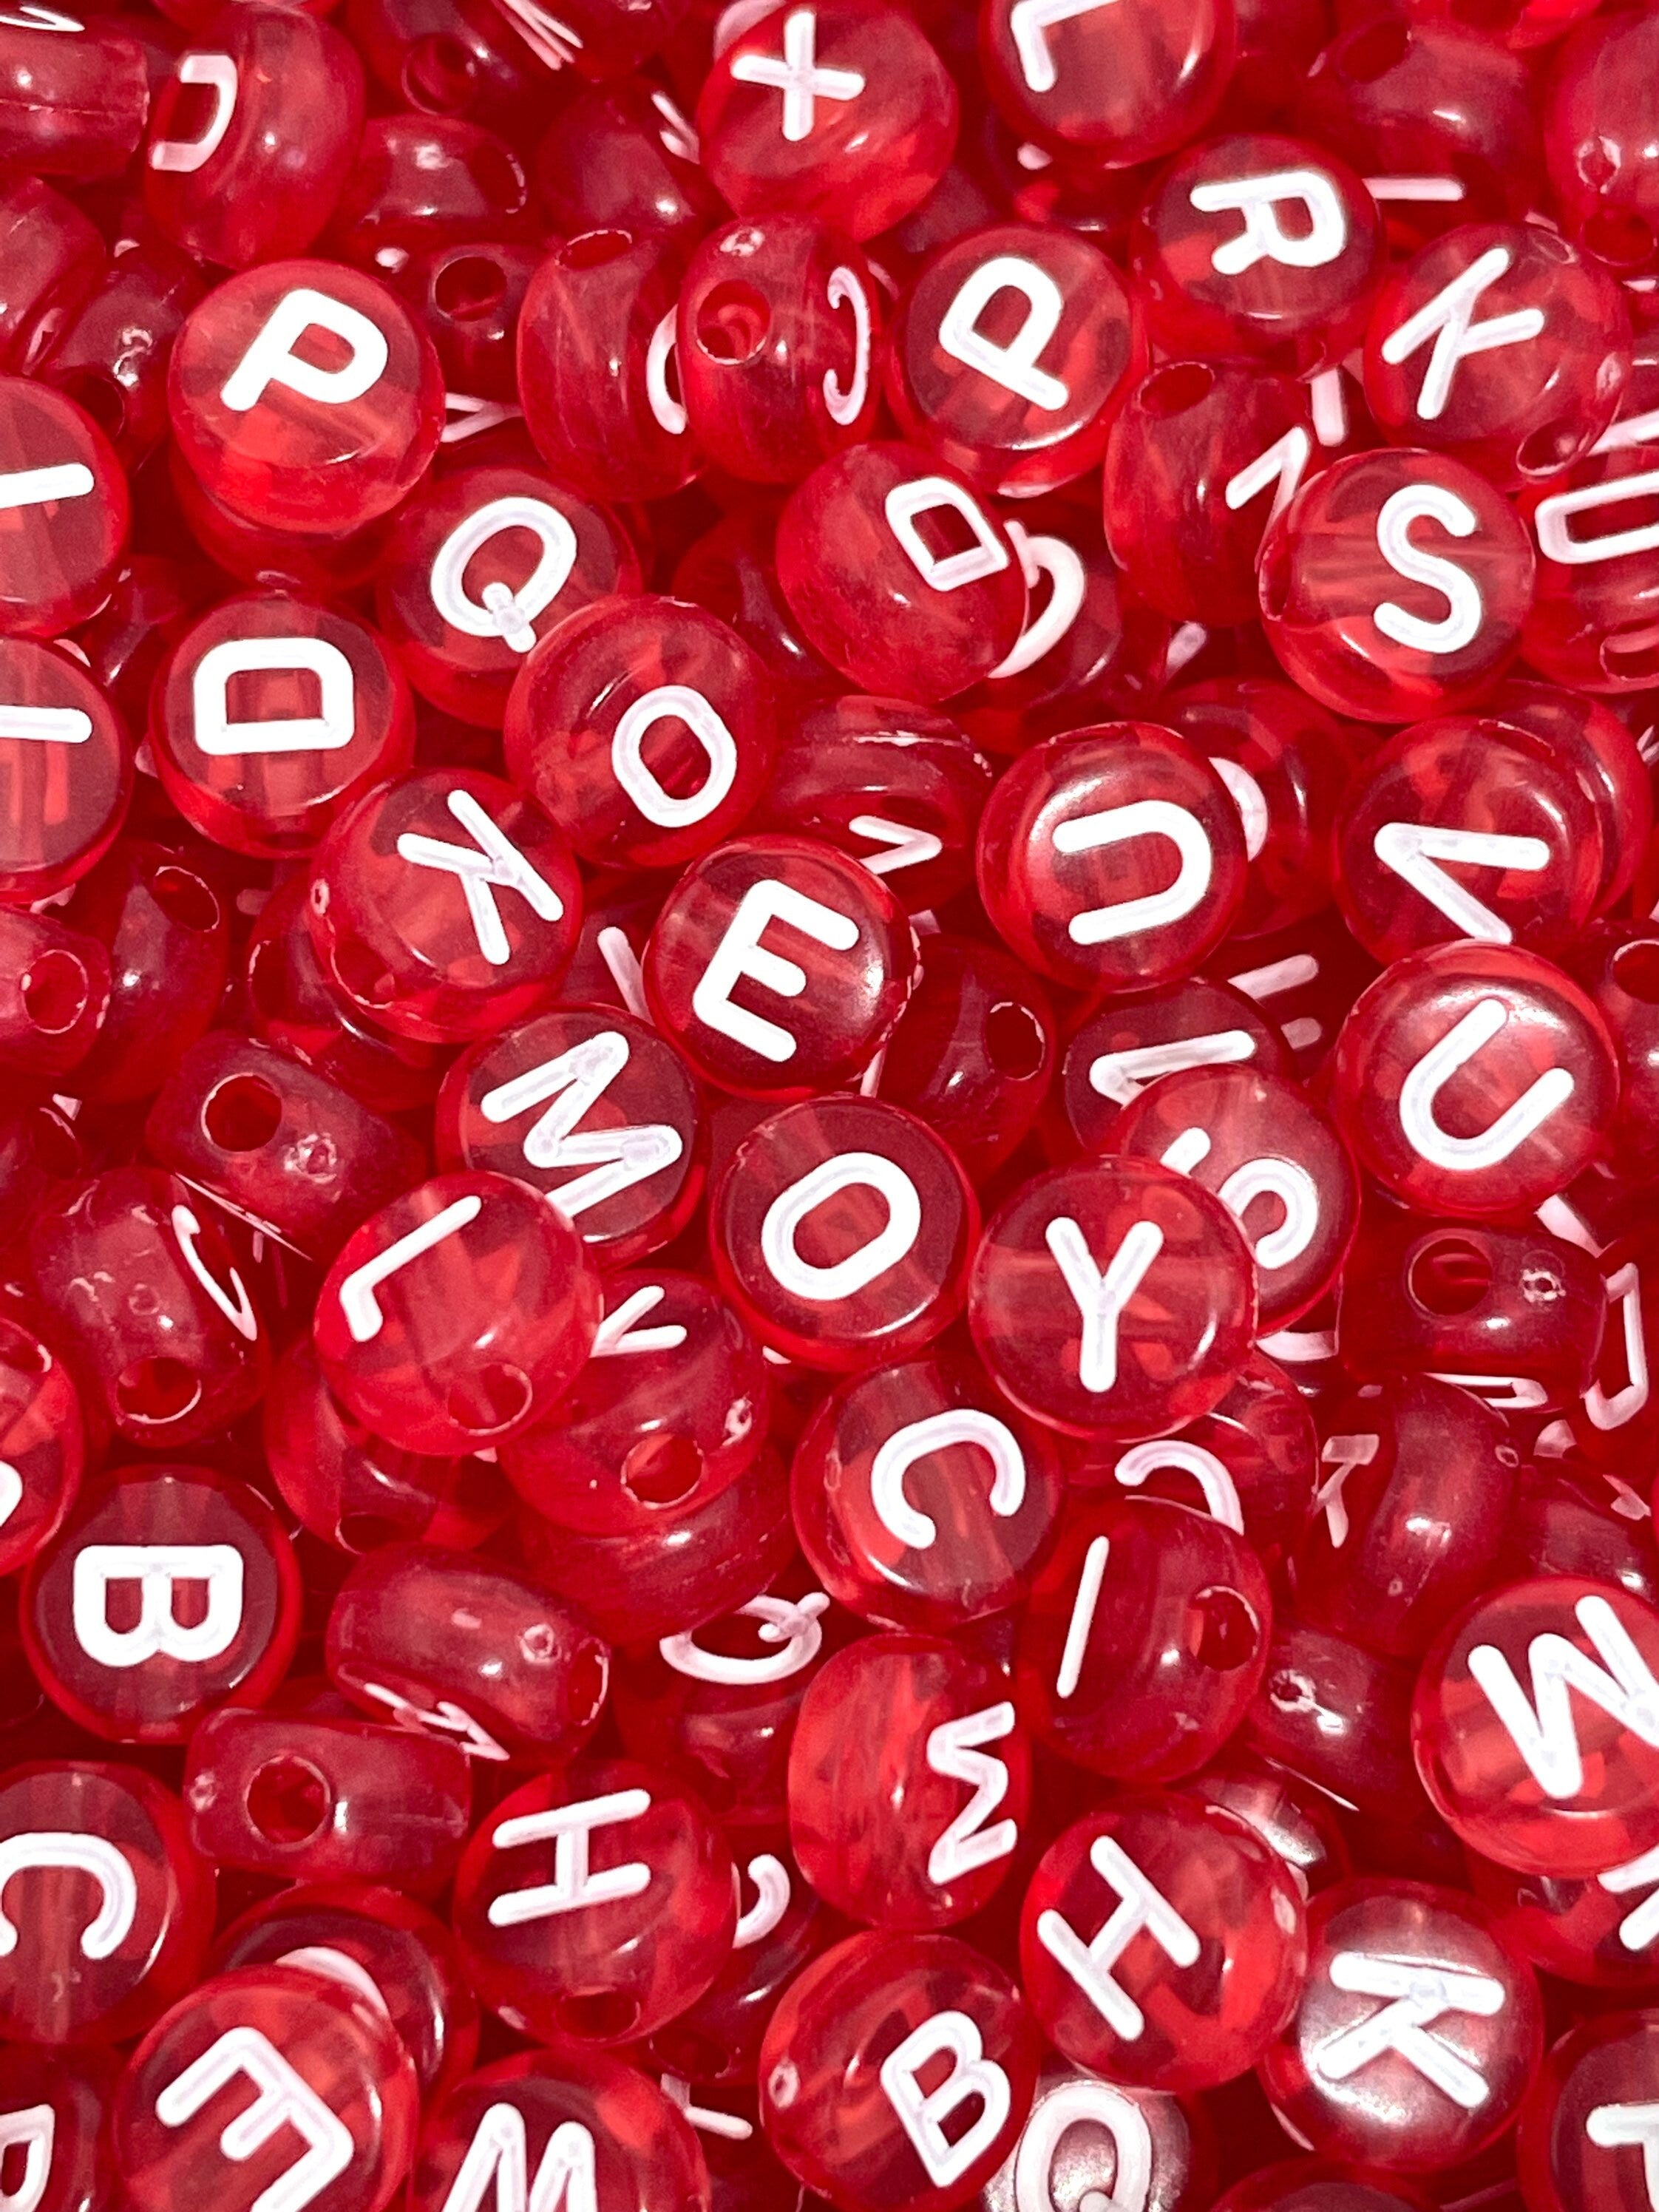 Red and White Letter Beads, Red and White Alphabet Beads, Candy Cane Letter Beads, Christmas Letter Beads for Jewelry Making